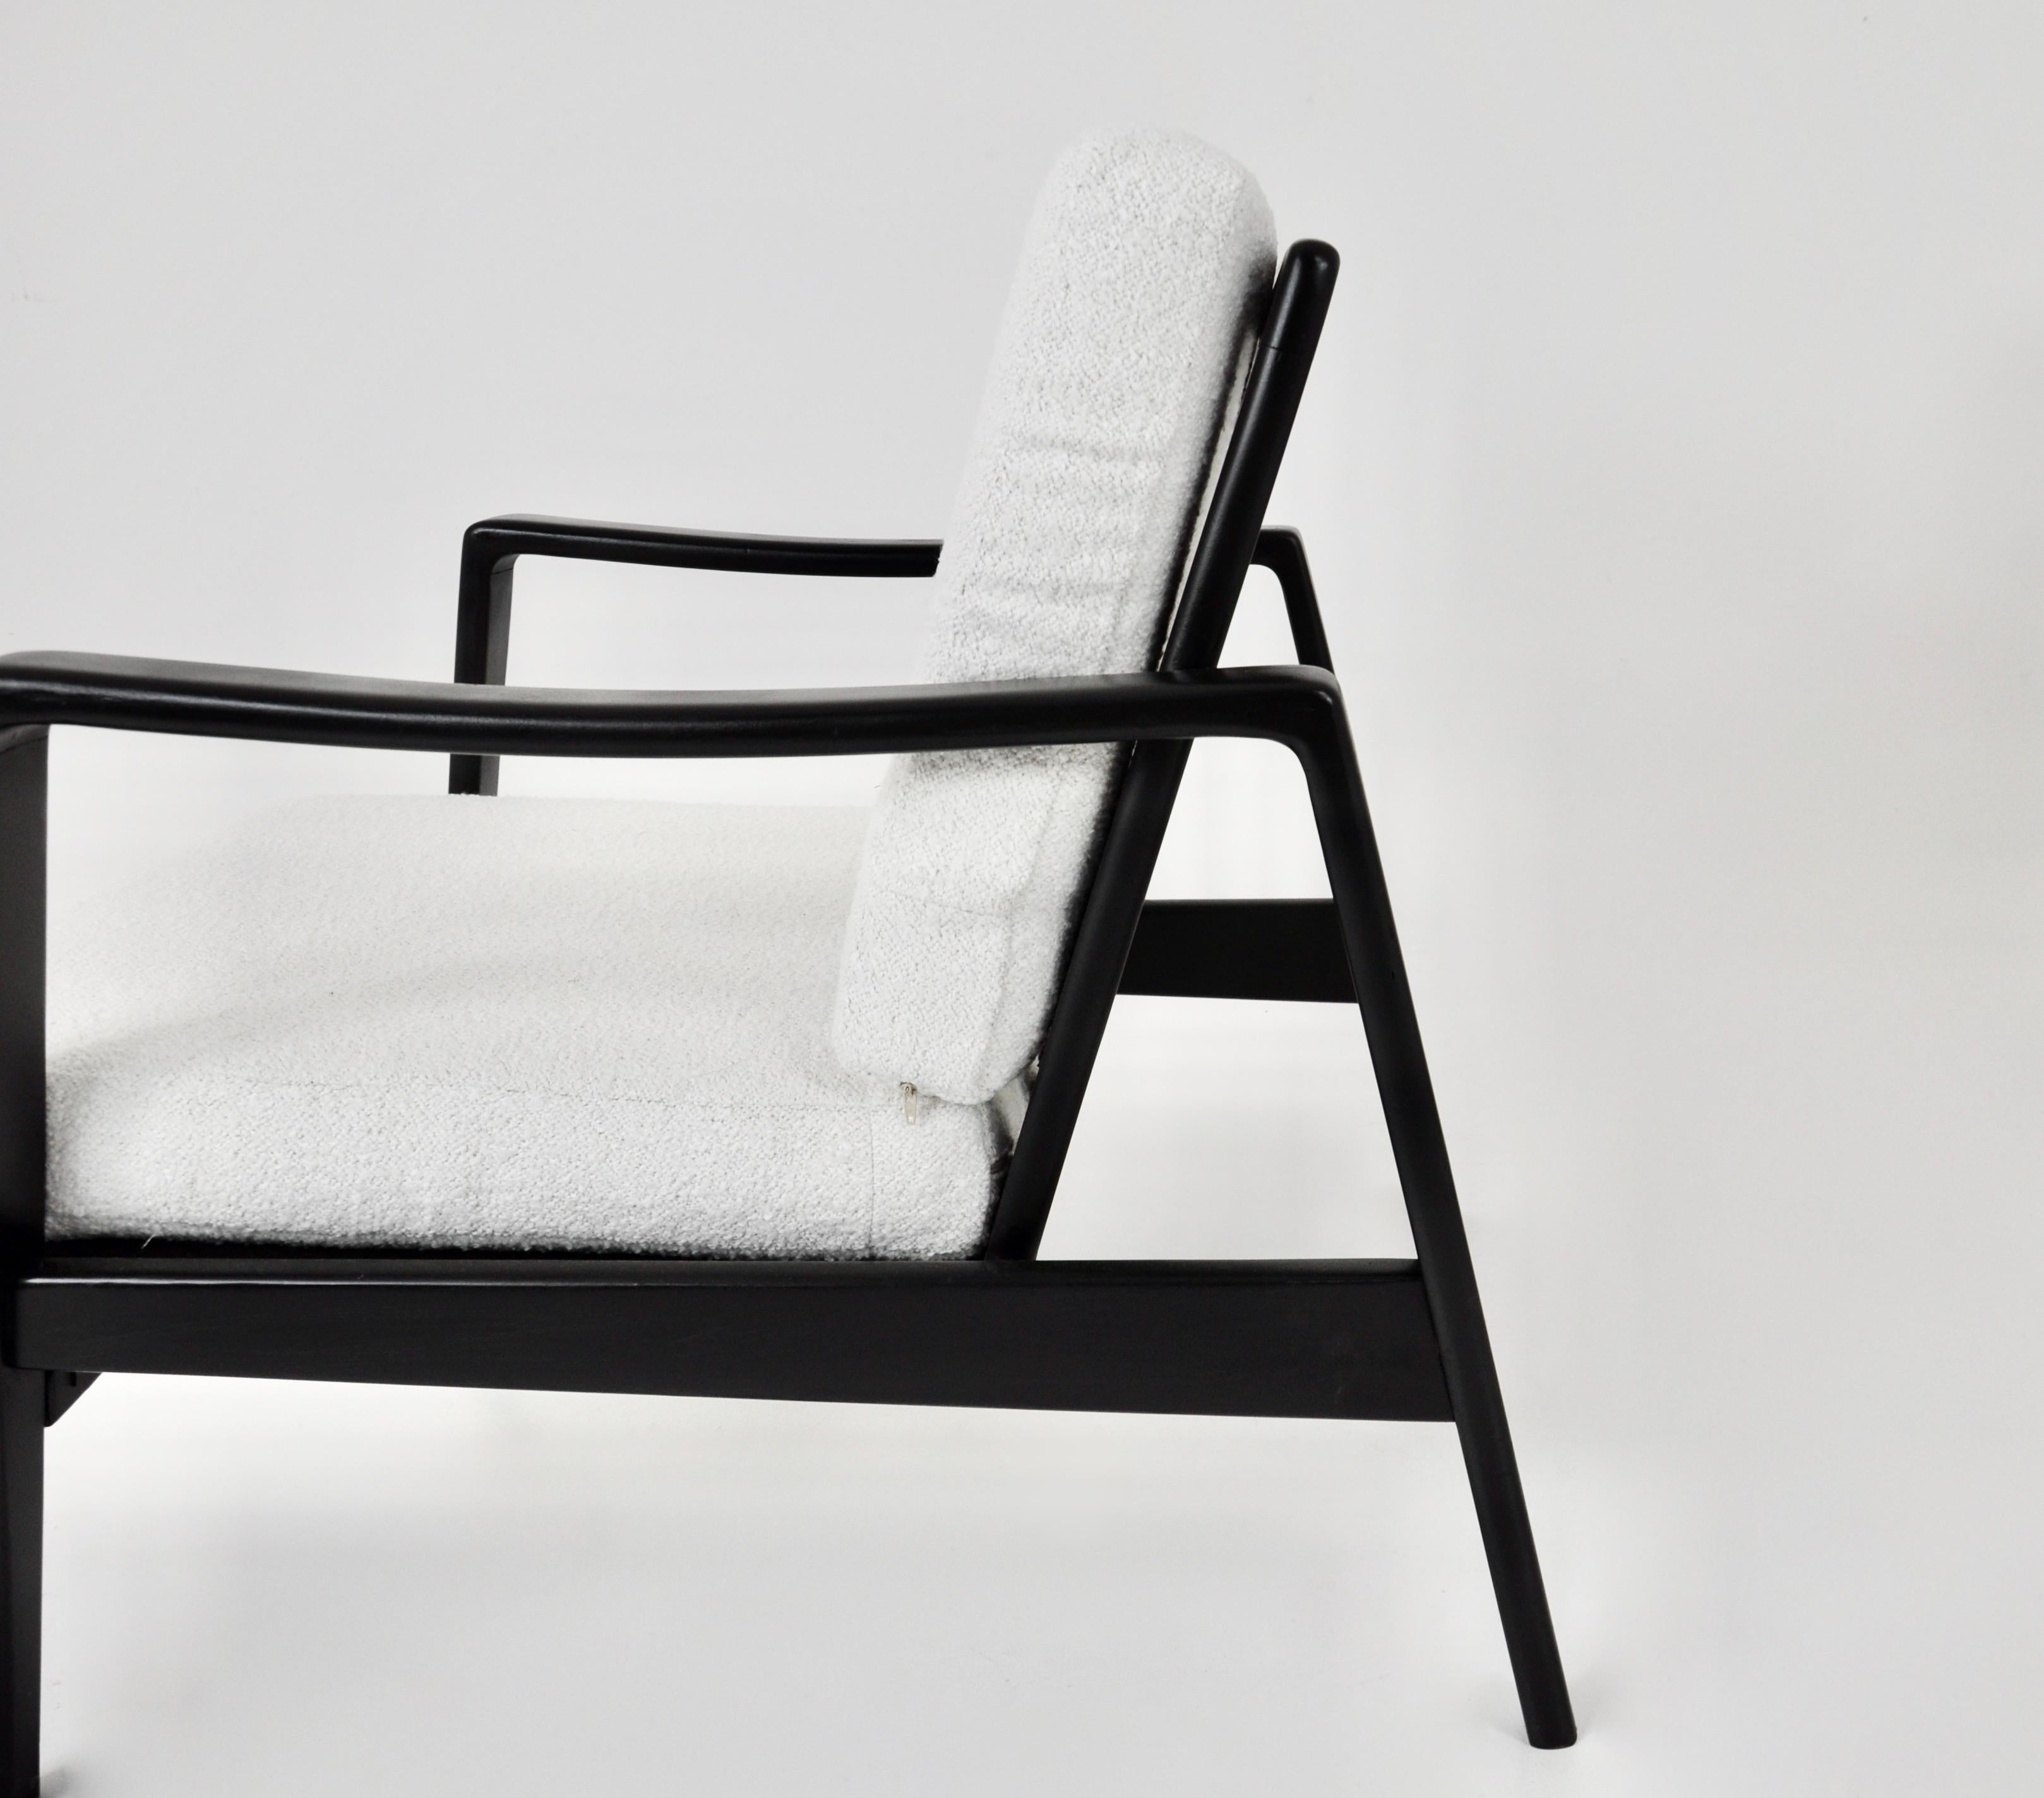 Pair of Scandinavian Lounge Chairs by Arne Wahl Iversen for Komfort, 1950s For Sale 3